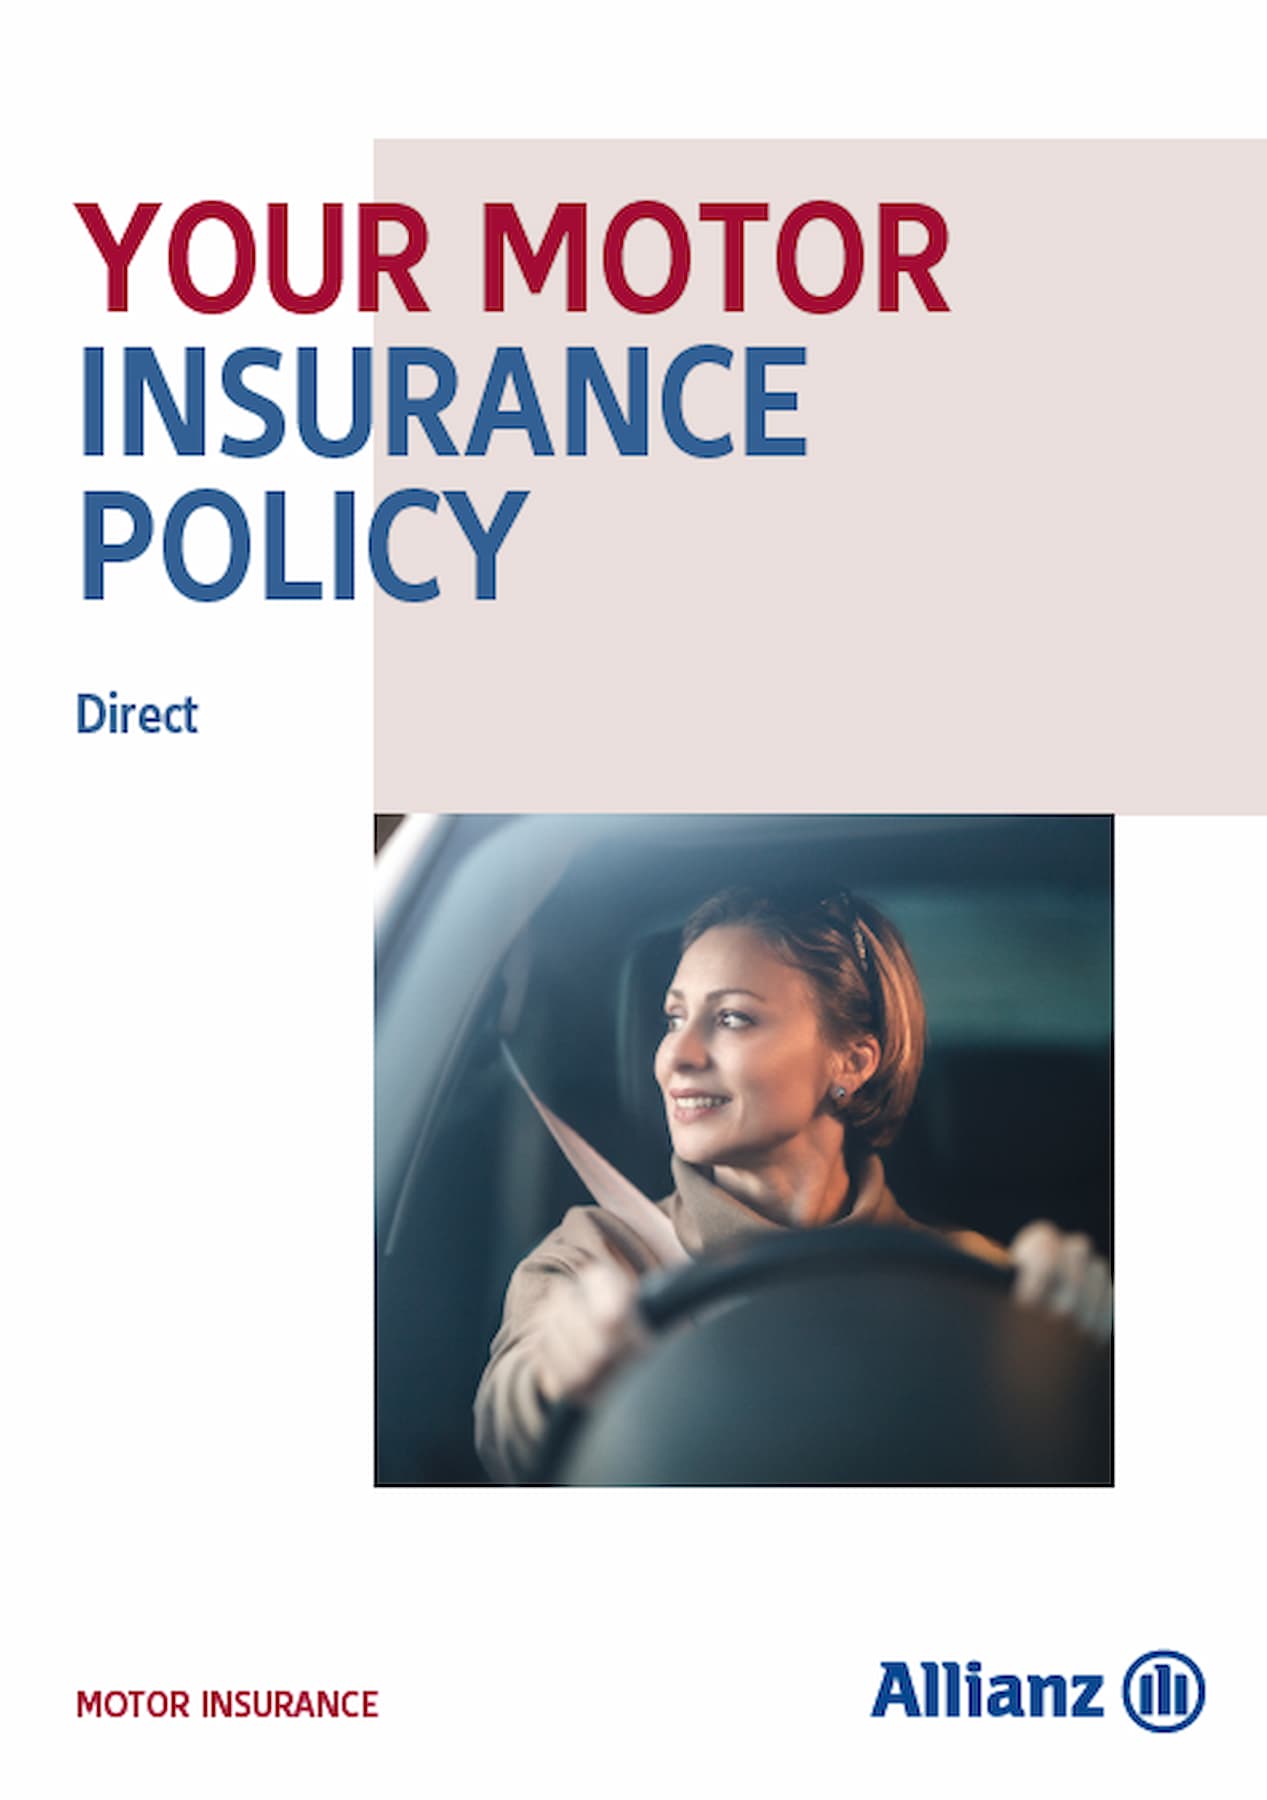 Motor insurance policy